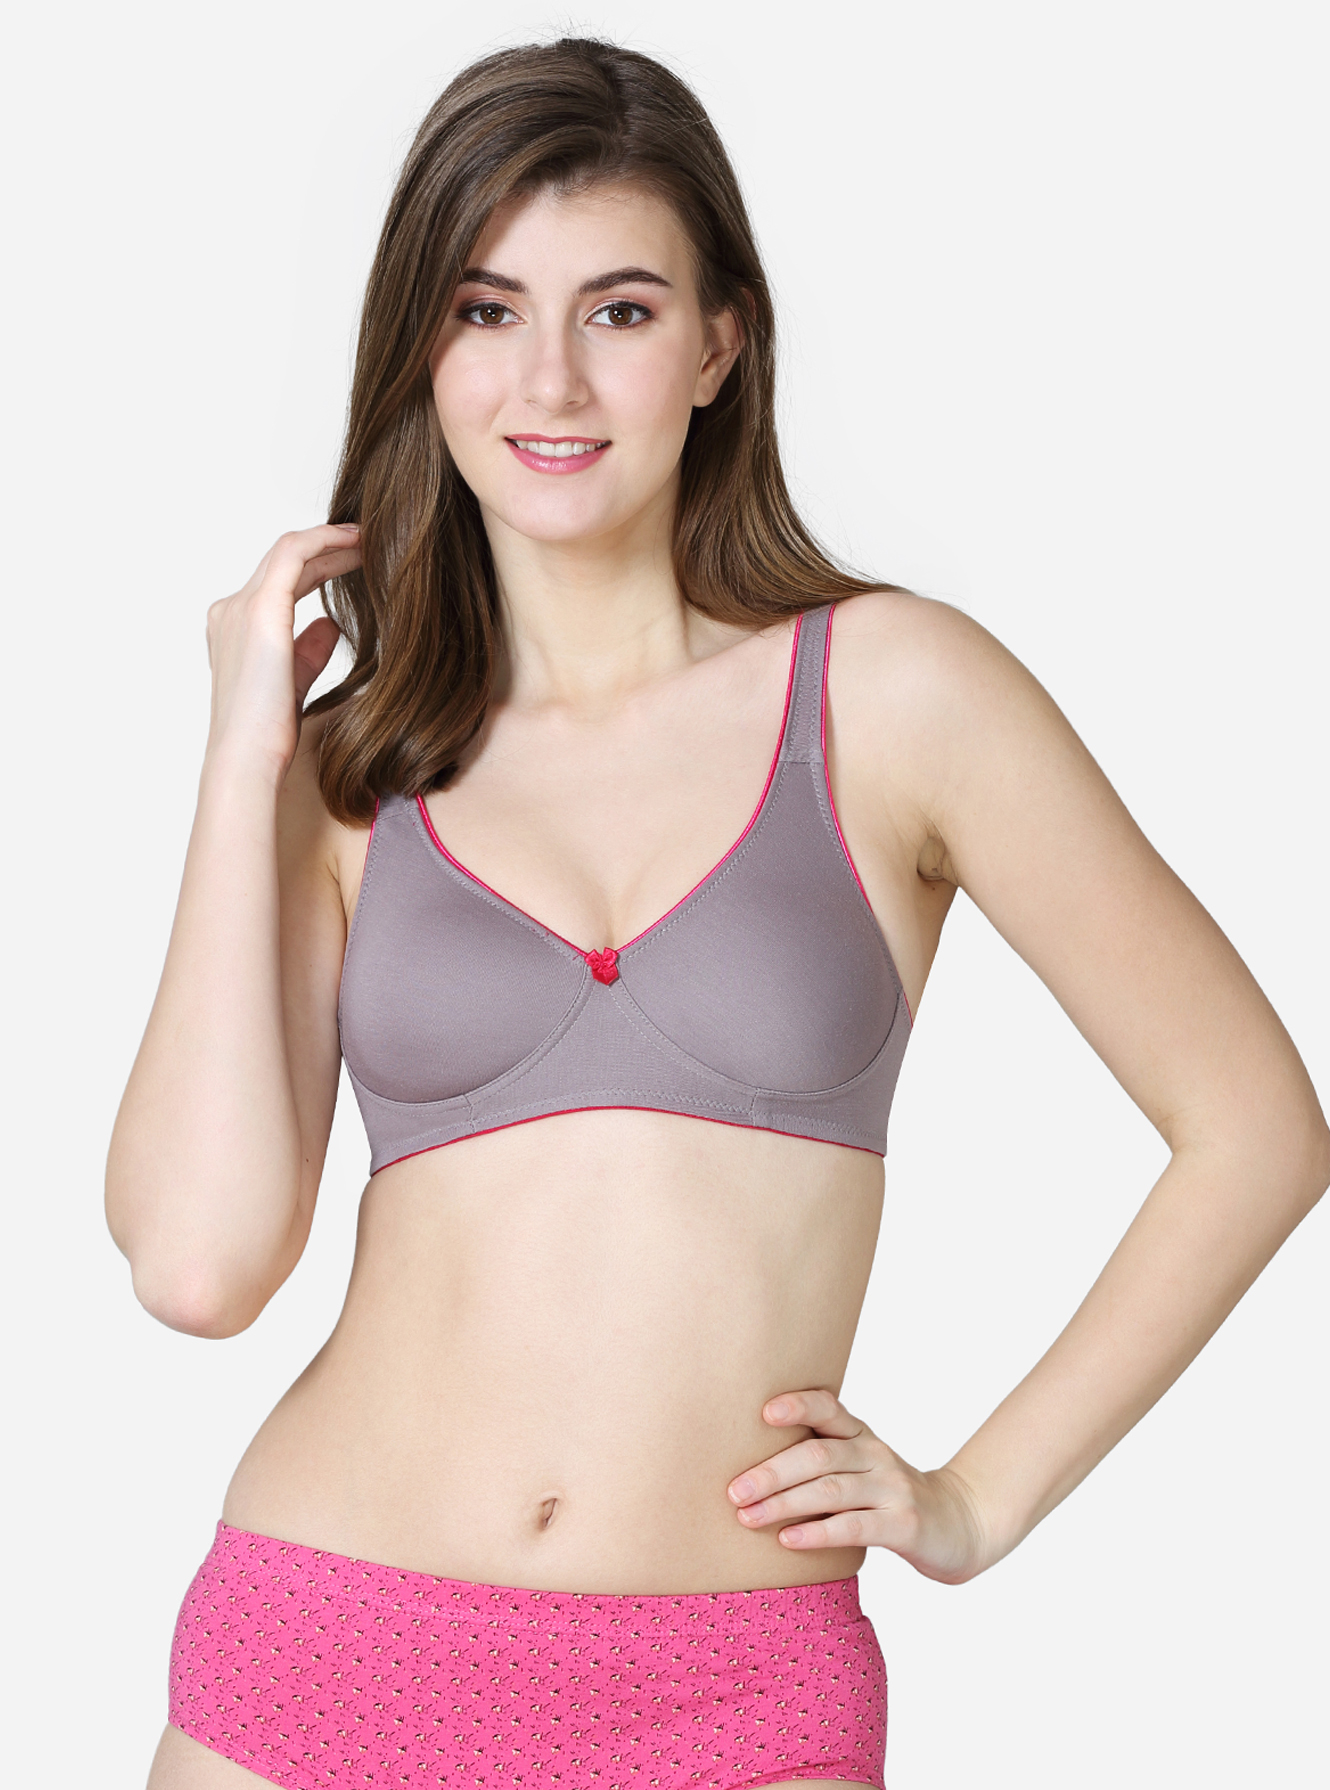 Double layered full coverage bra with scallop edging